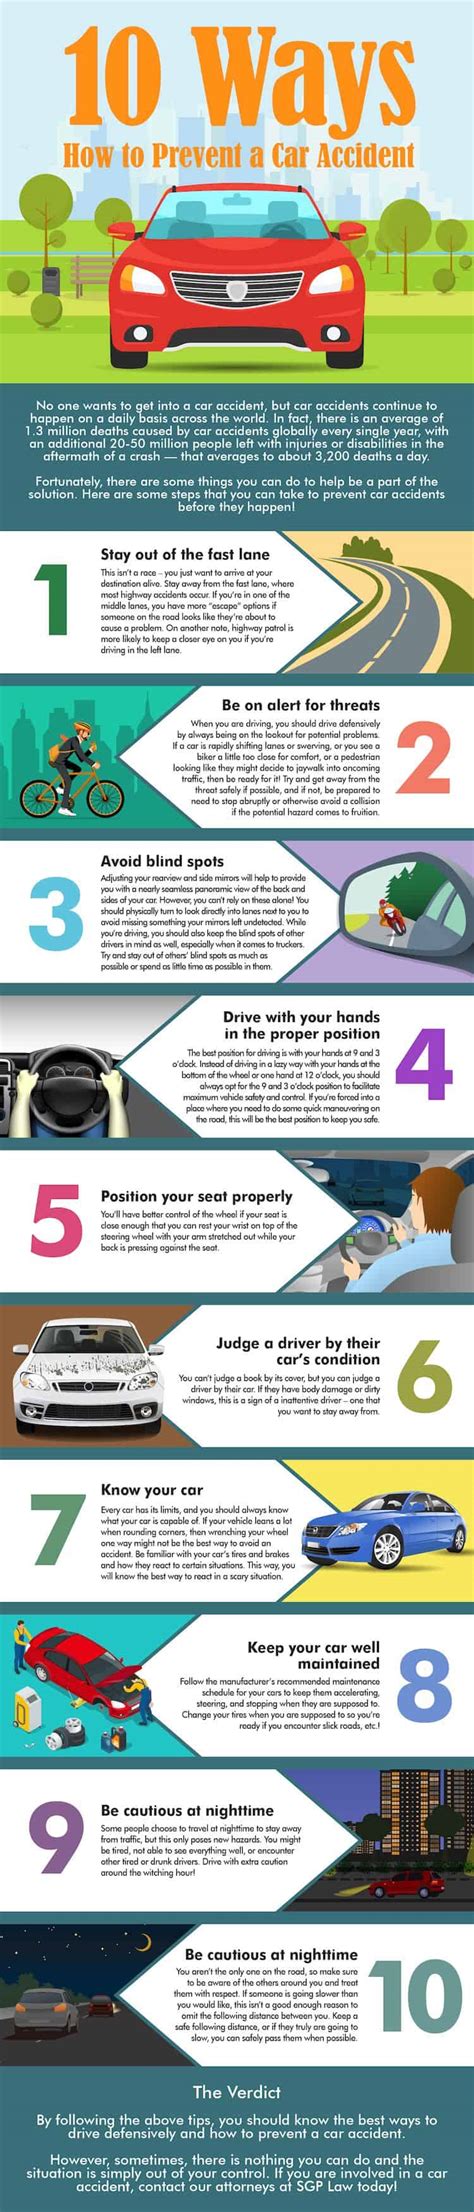 Ways To Prevent A Car Accident And Stay Safe